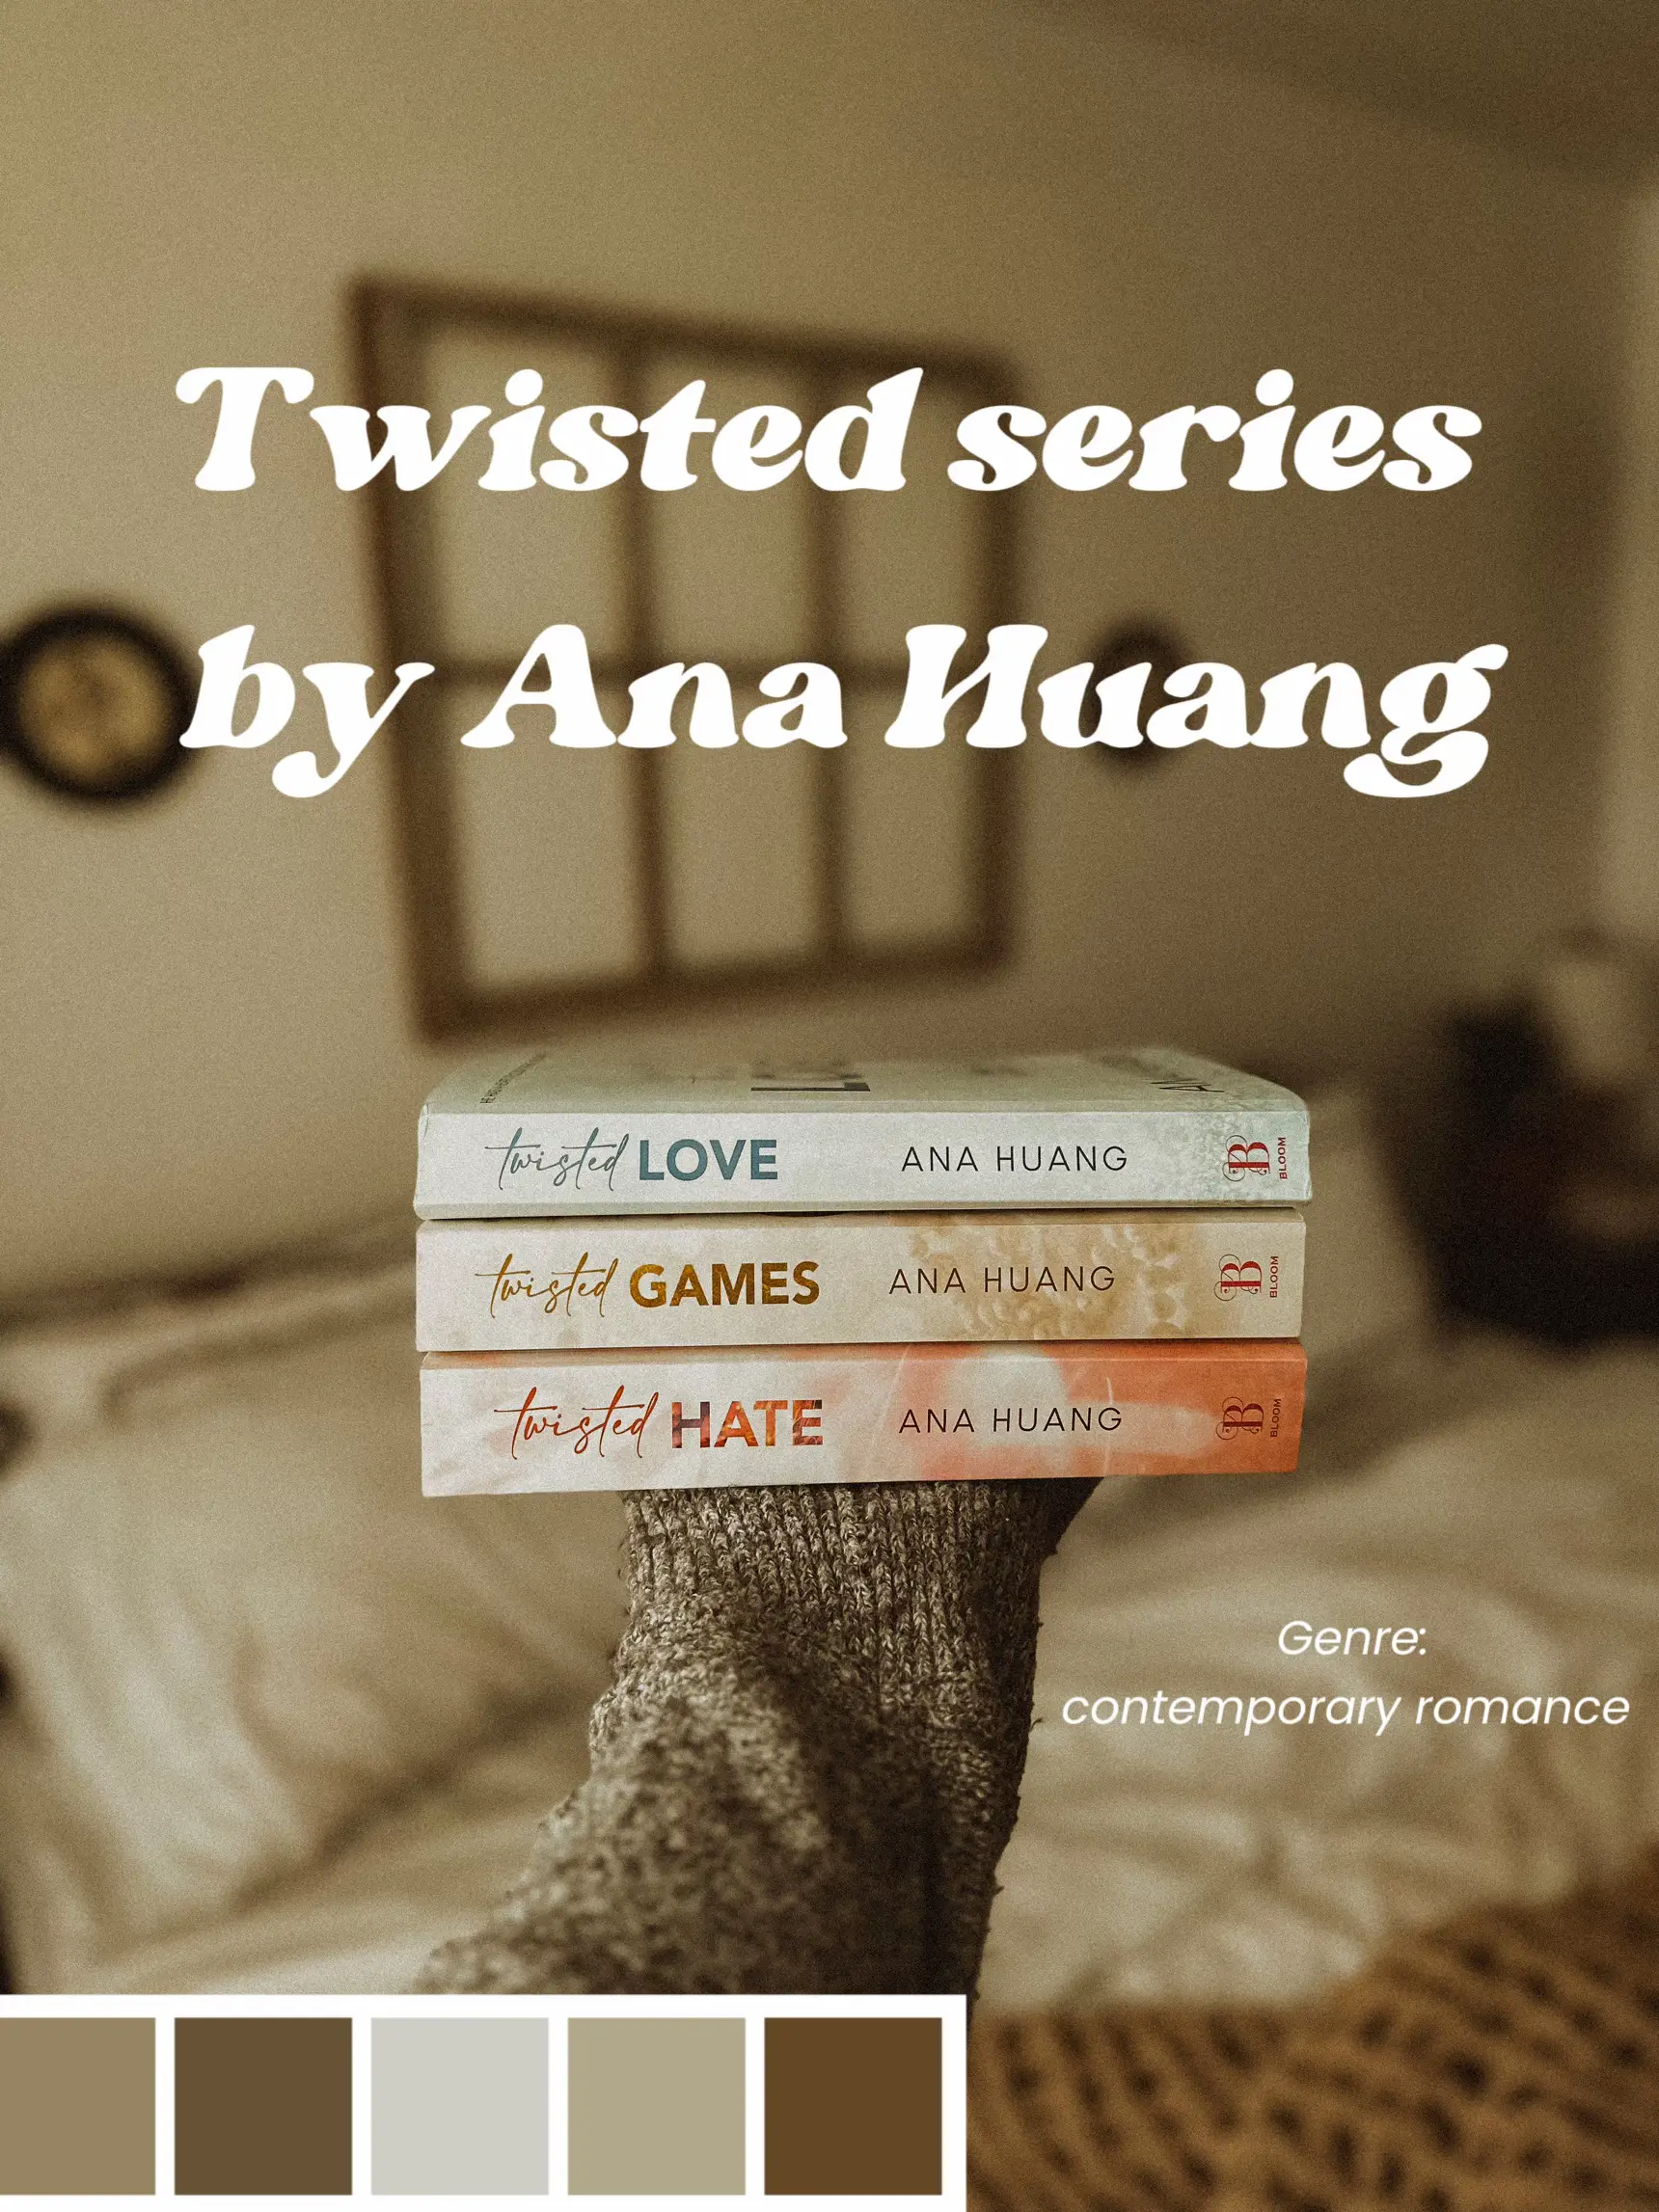 Twisted Series Bookmarks | Ana Huang | Romance book series book marks |  Stocking Stuffer | Readers Gift | Gift under 10